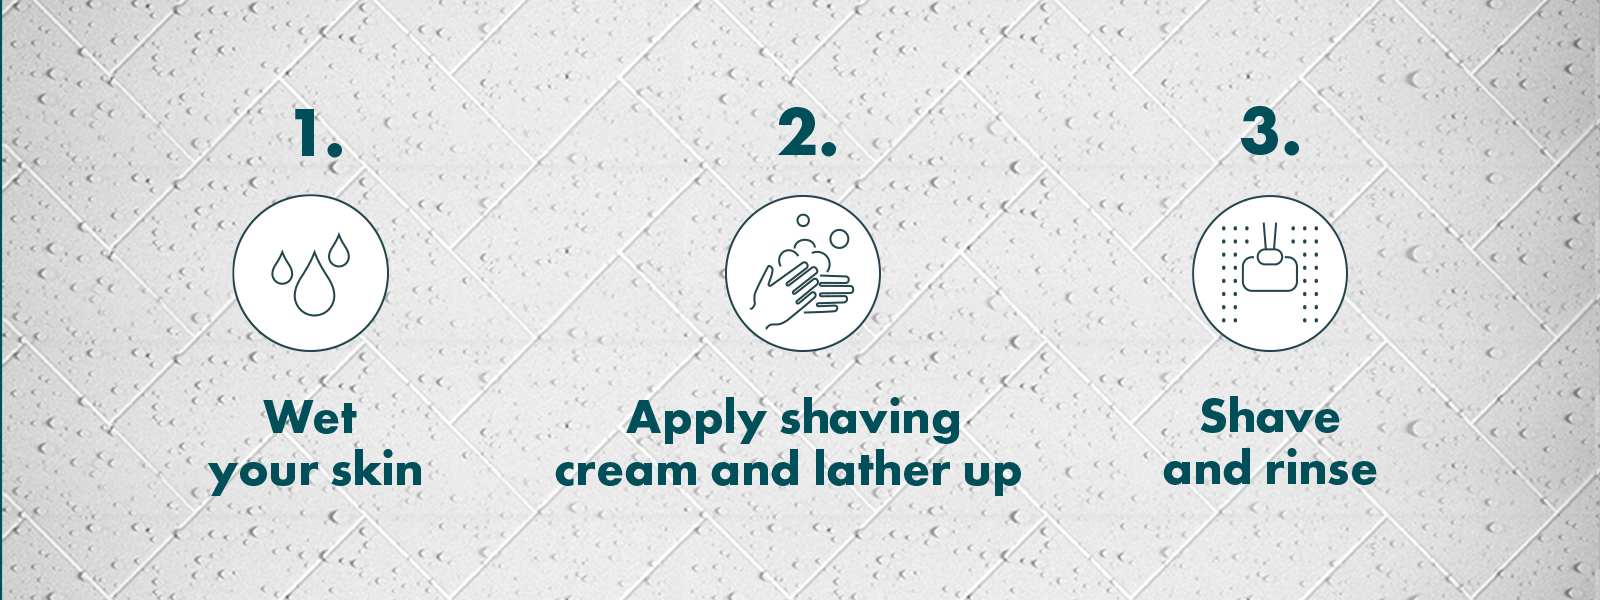 1. Wet your skin 2. Apply shaving cream and lather up 3. Shave and rinse